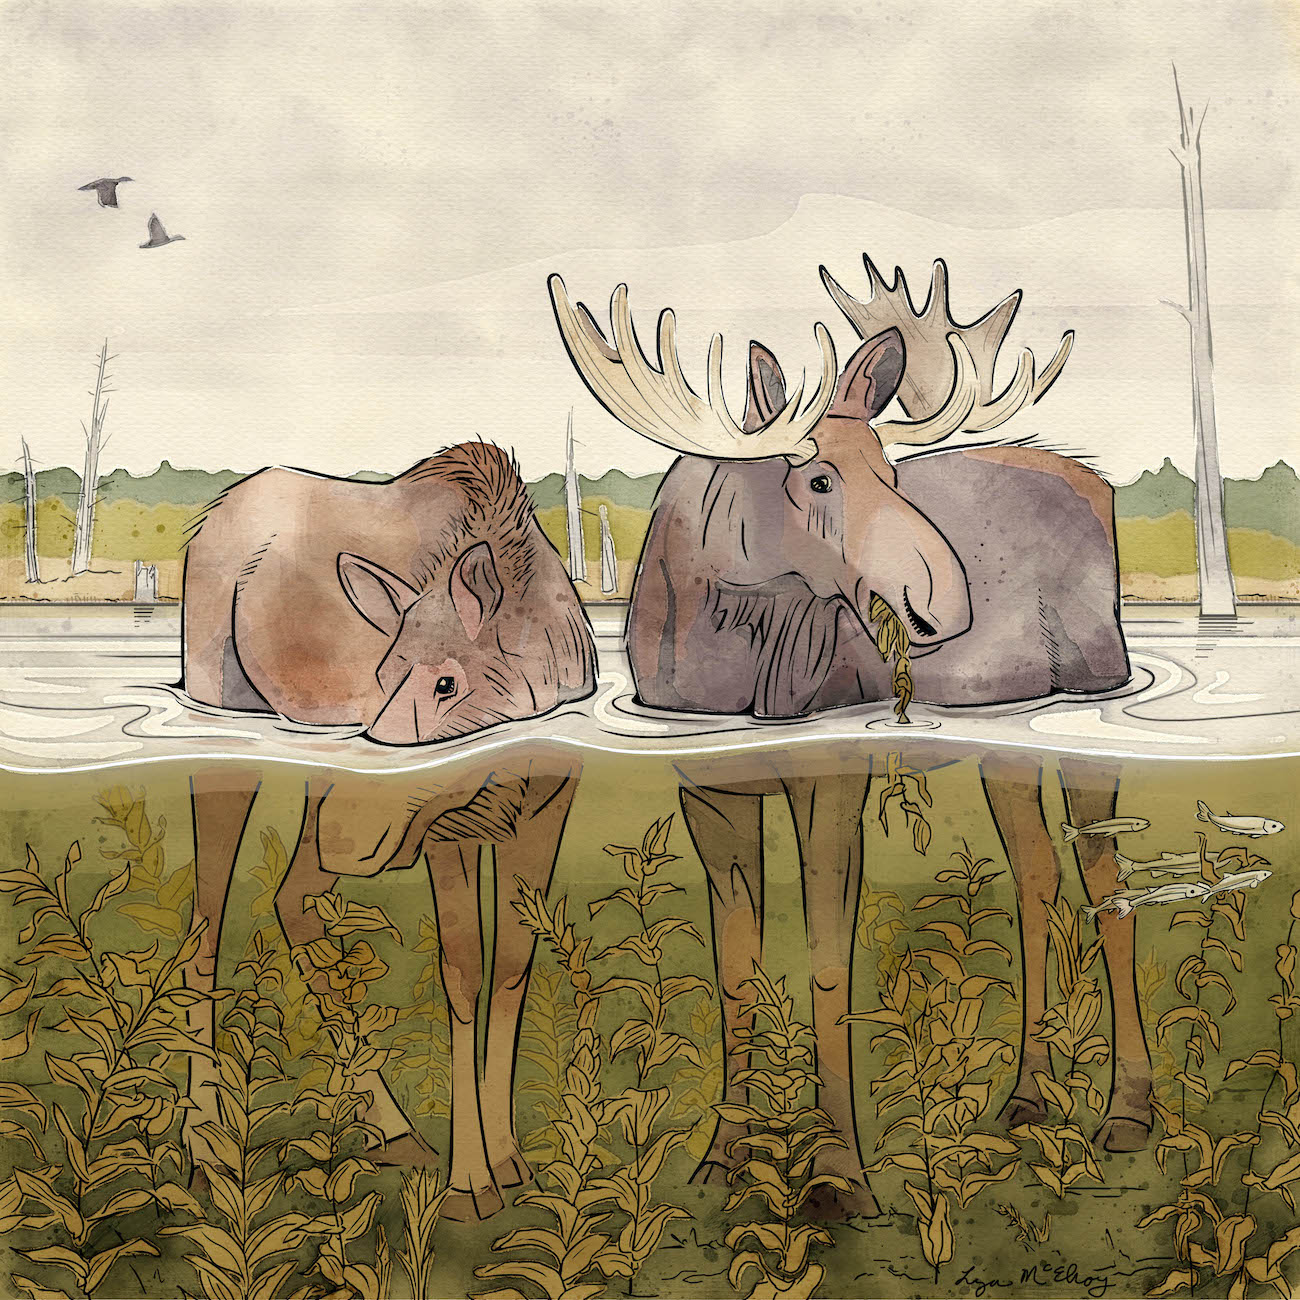 An ink and watercolor sketch shows a bull and cow moose standing in a pond with weeds growing underwater.